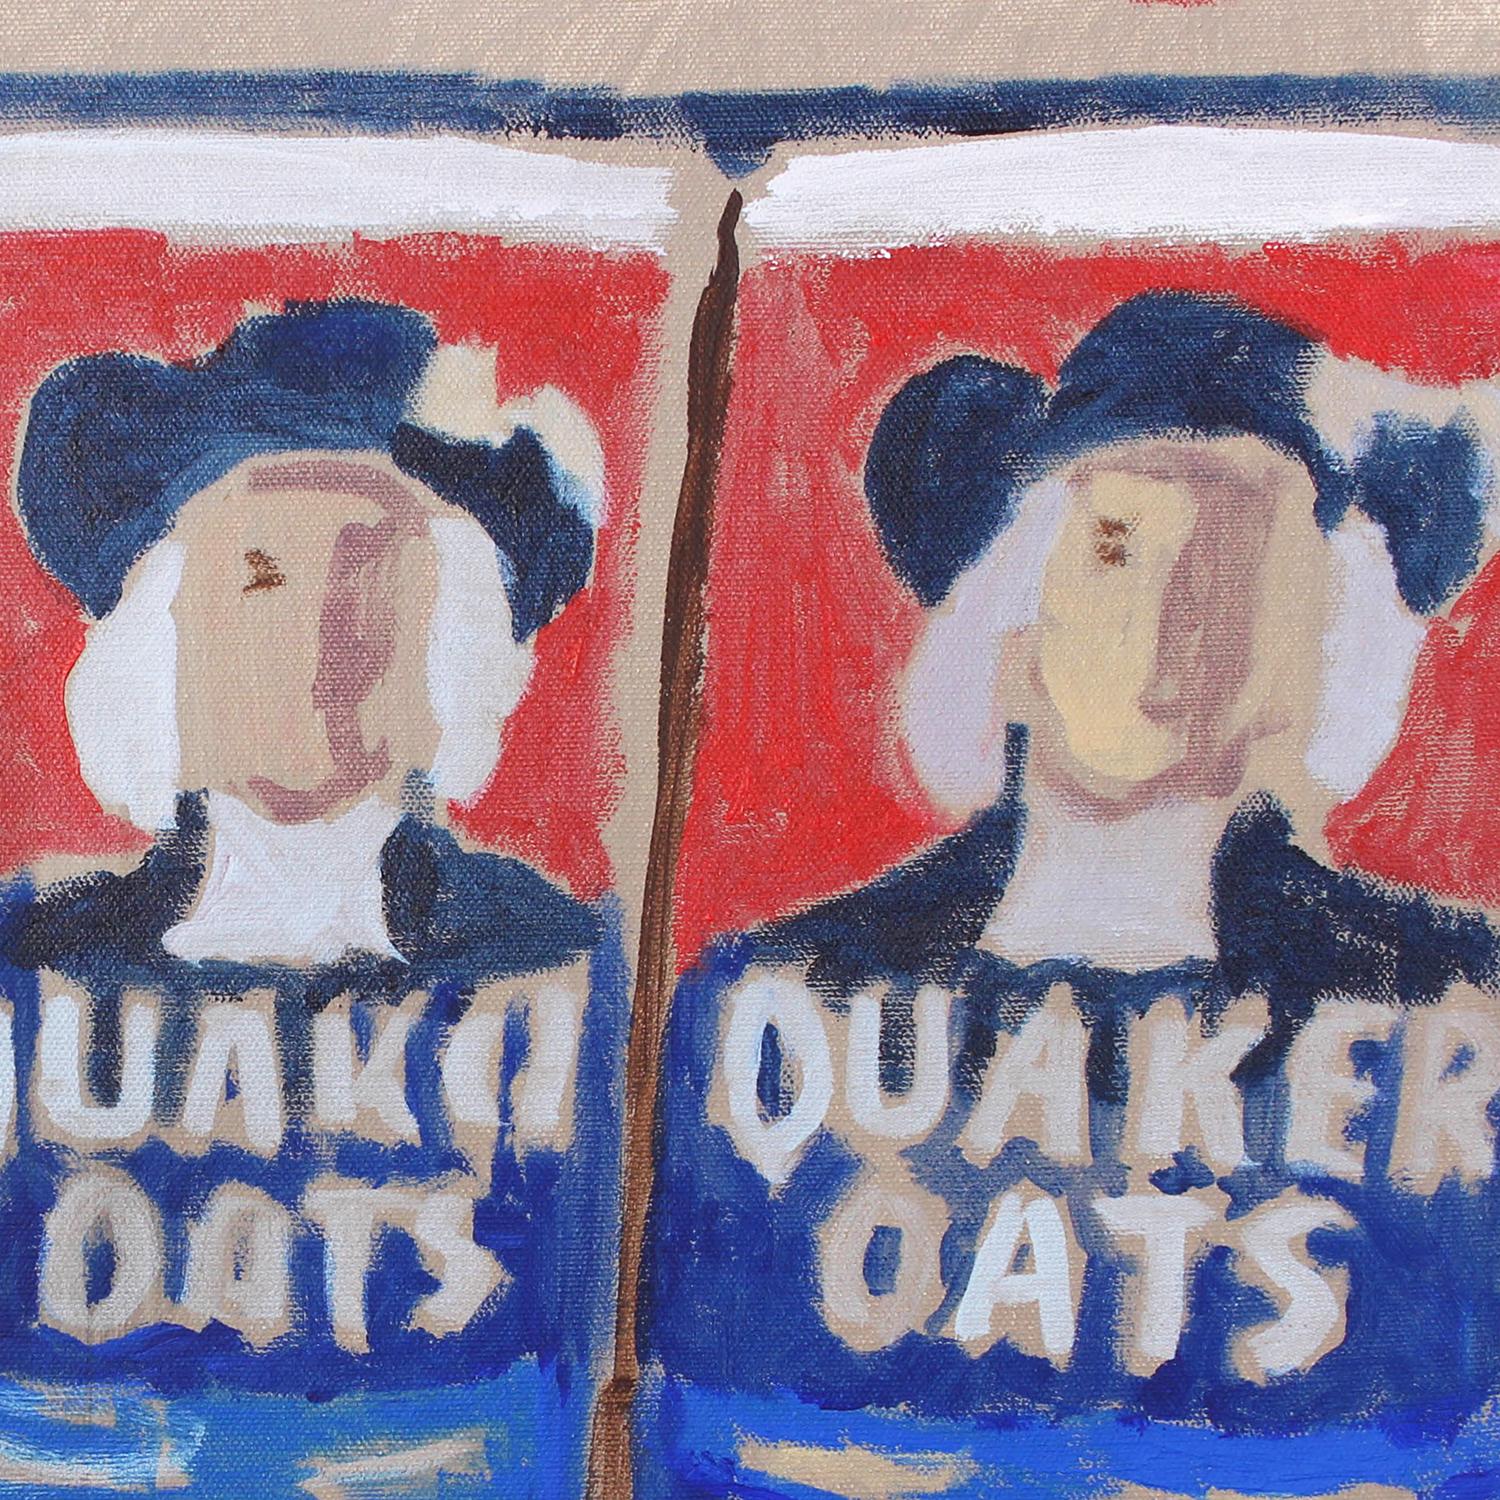 Quaker Oats - Painting by Brendan O'Connell